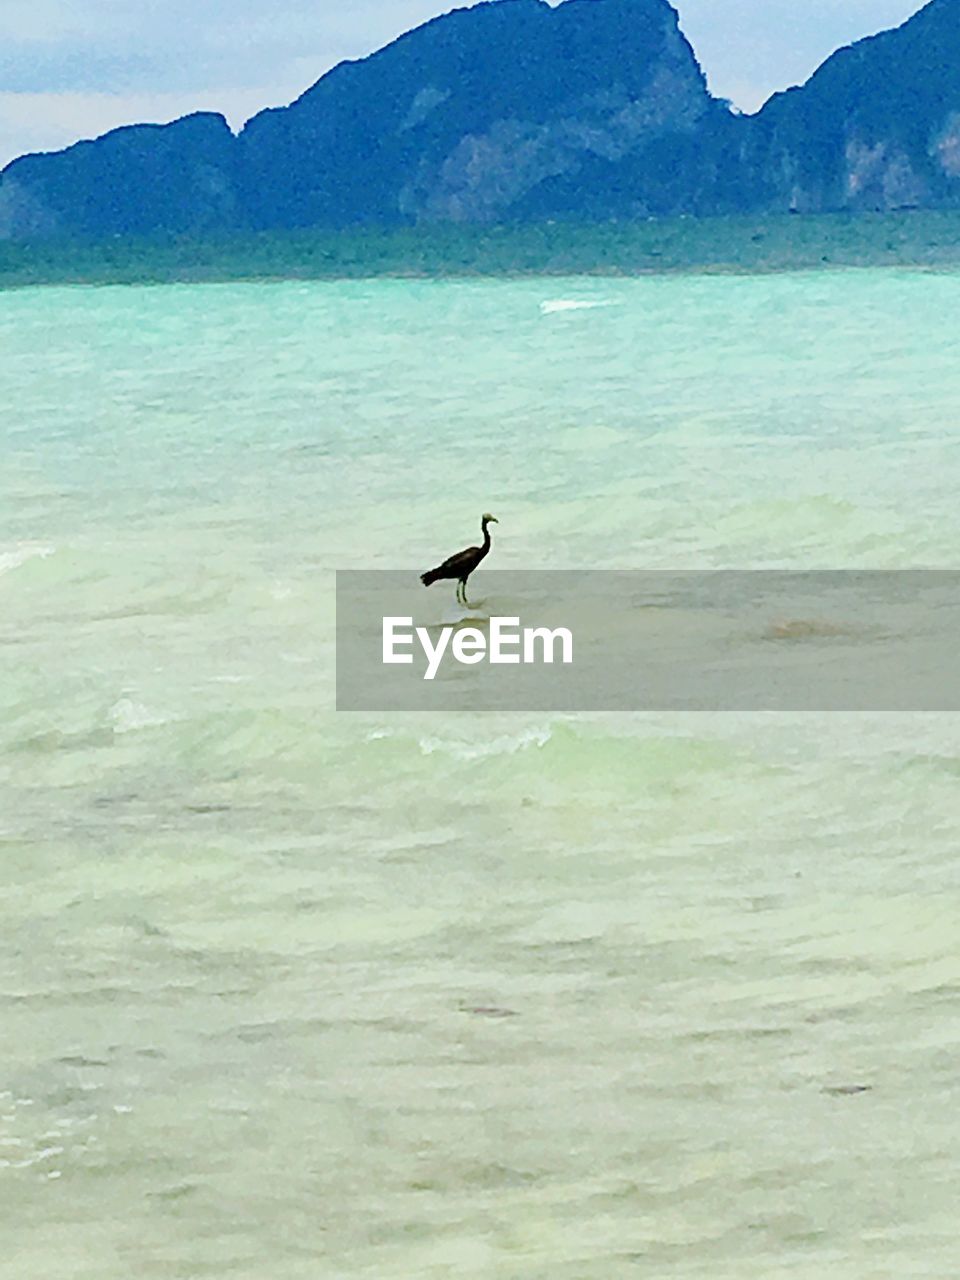 BIRD FLYING OVER SEA AGAINST MOUNTAINS